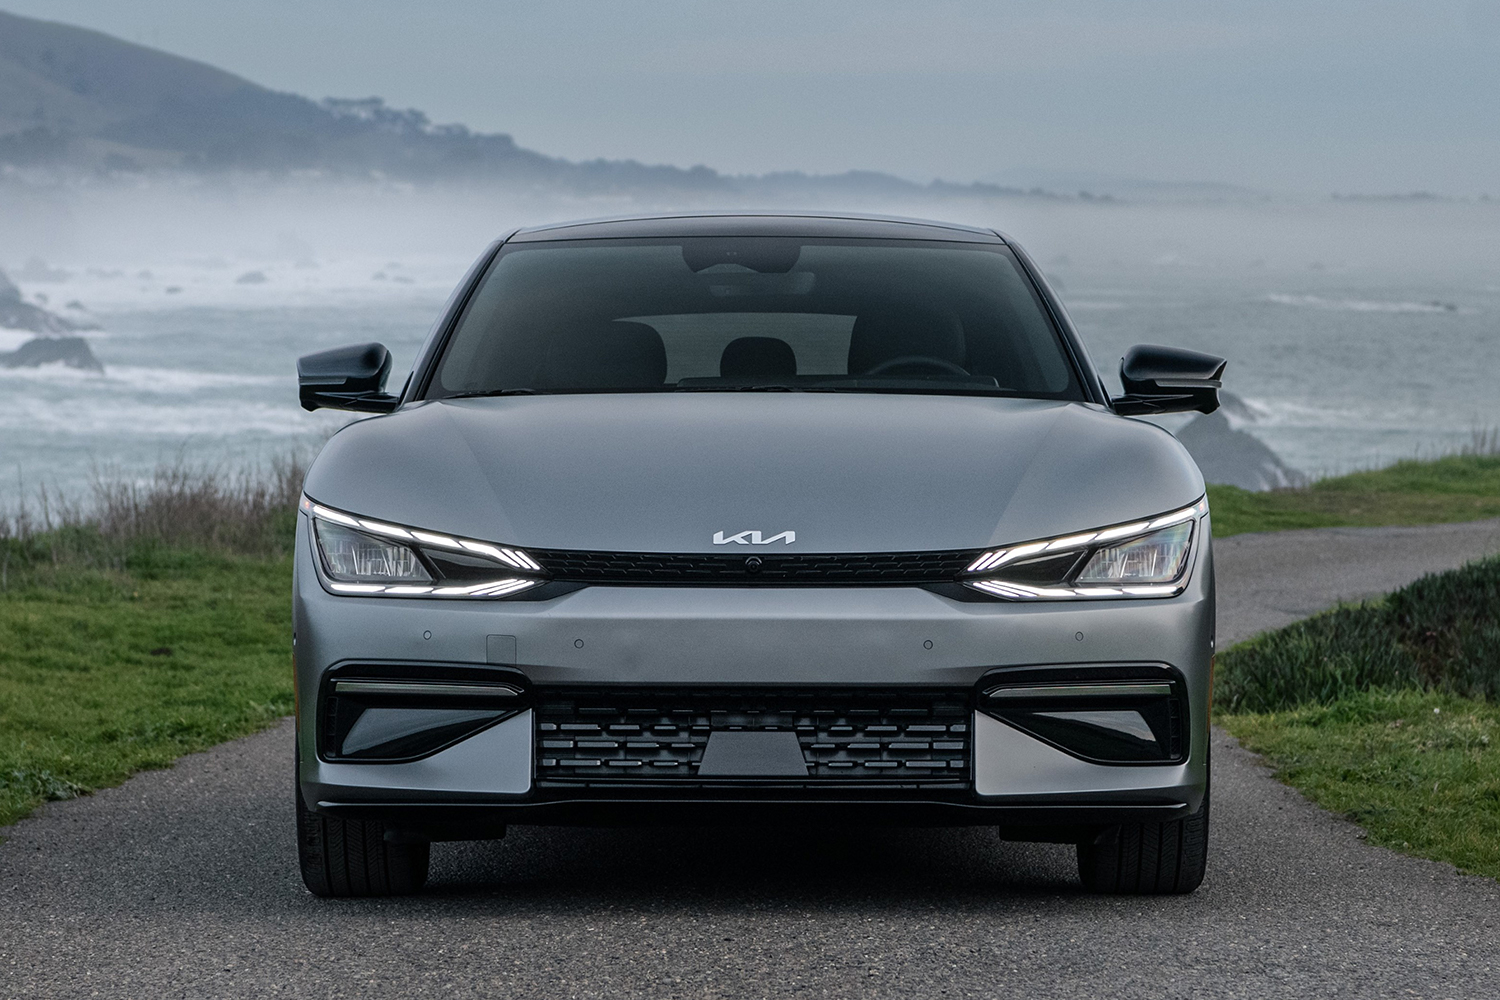 The front end of the 2022 Kia EV6 electric SUV